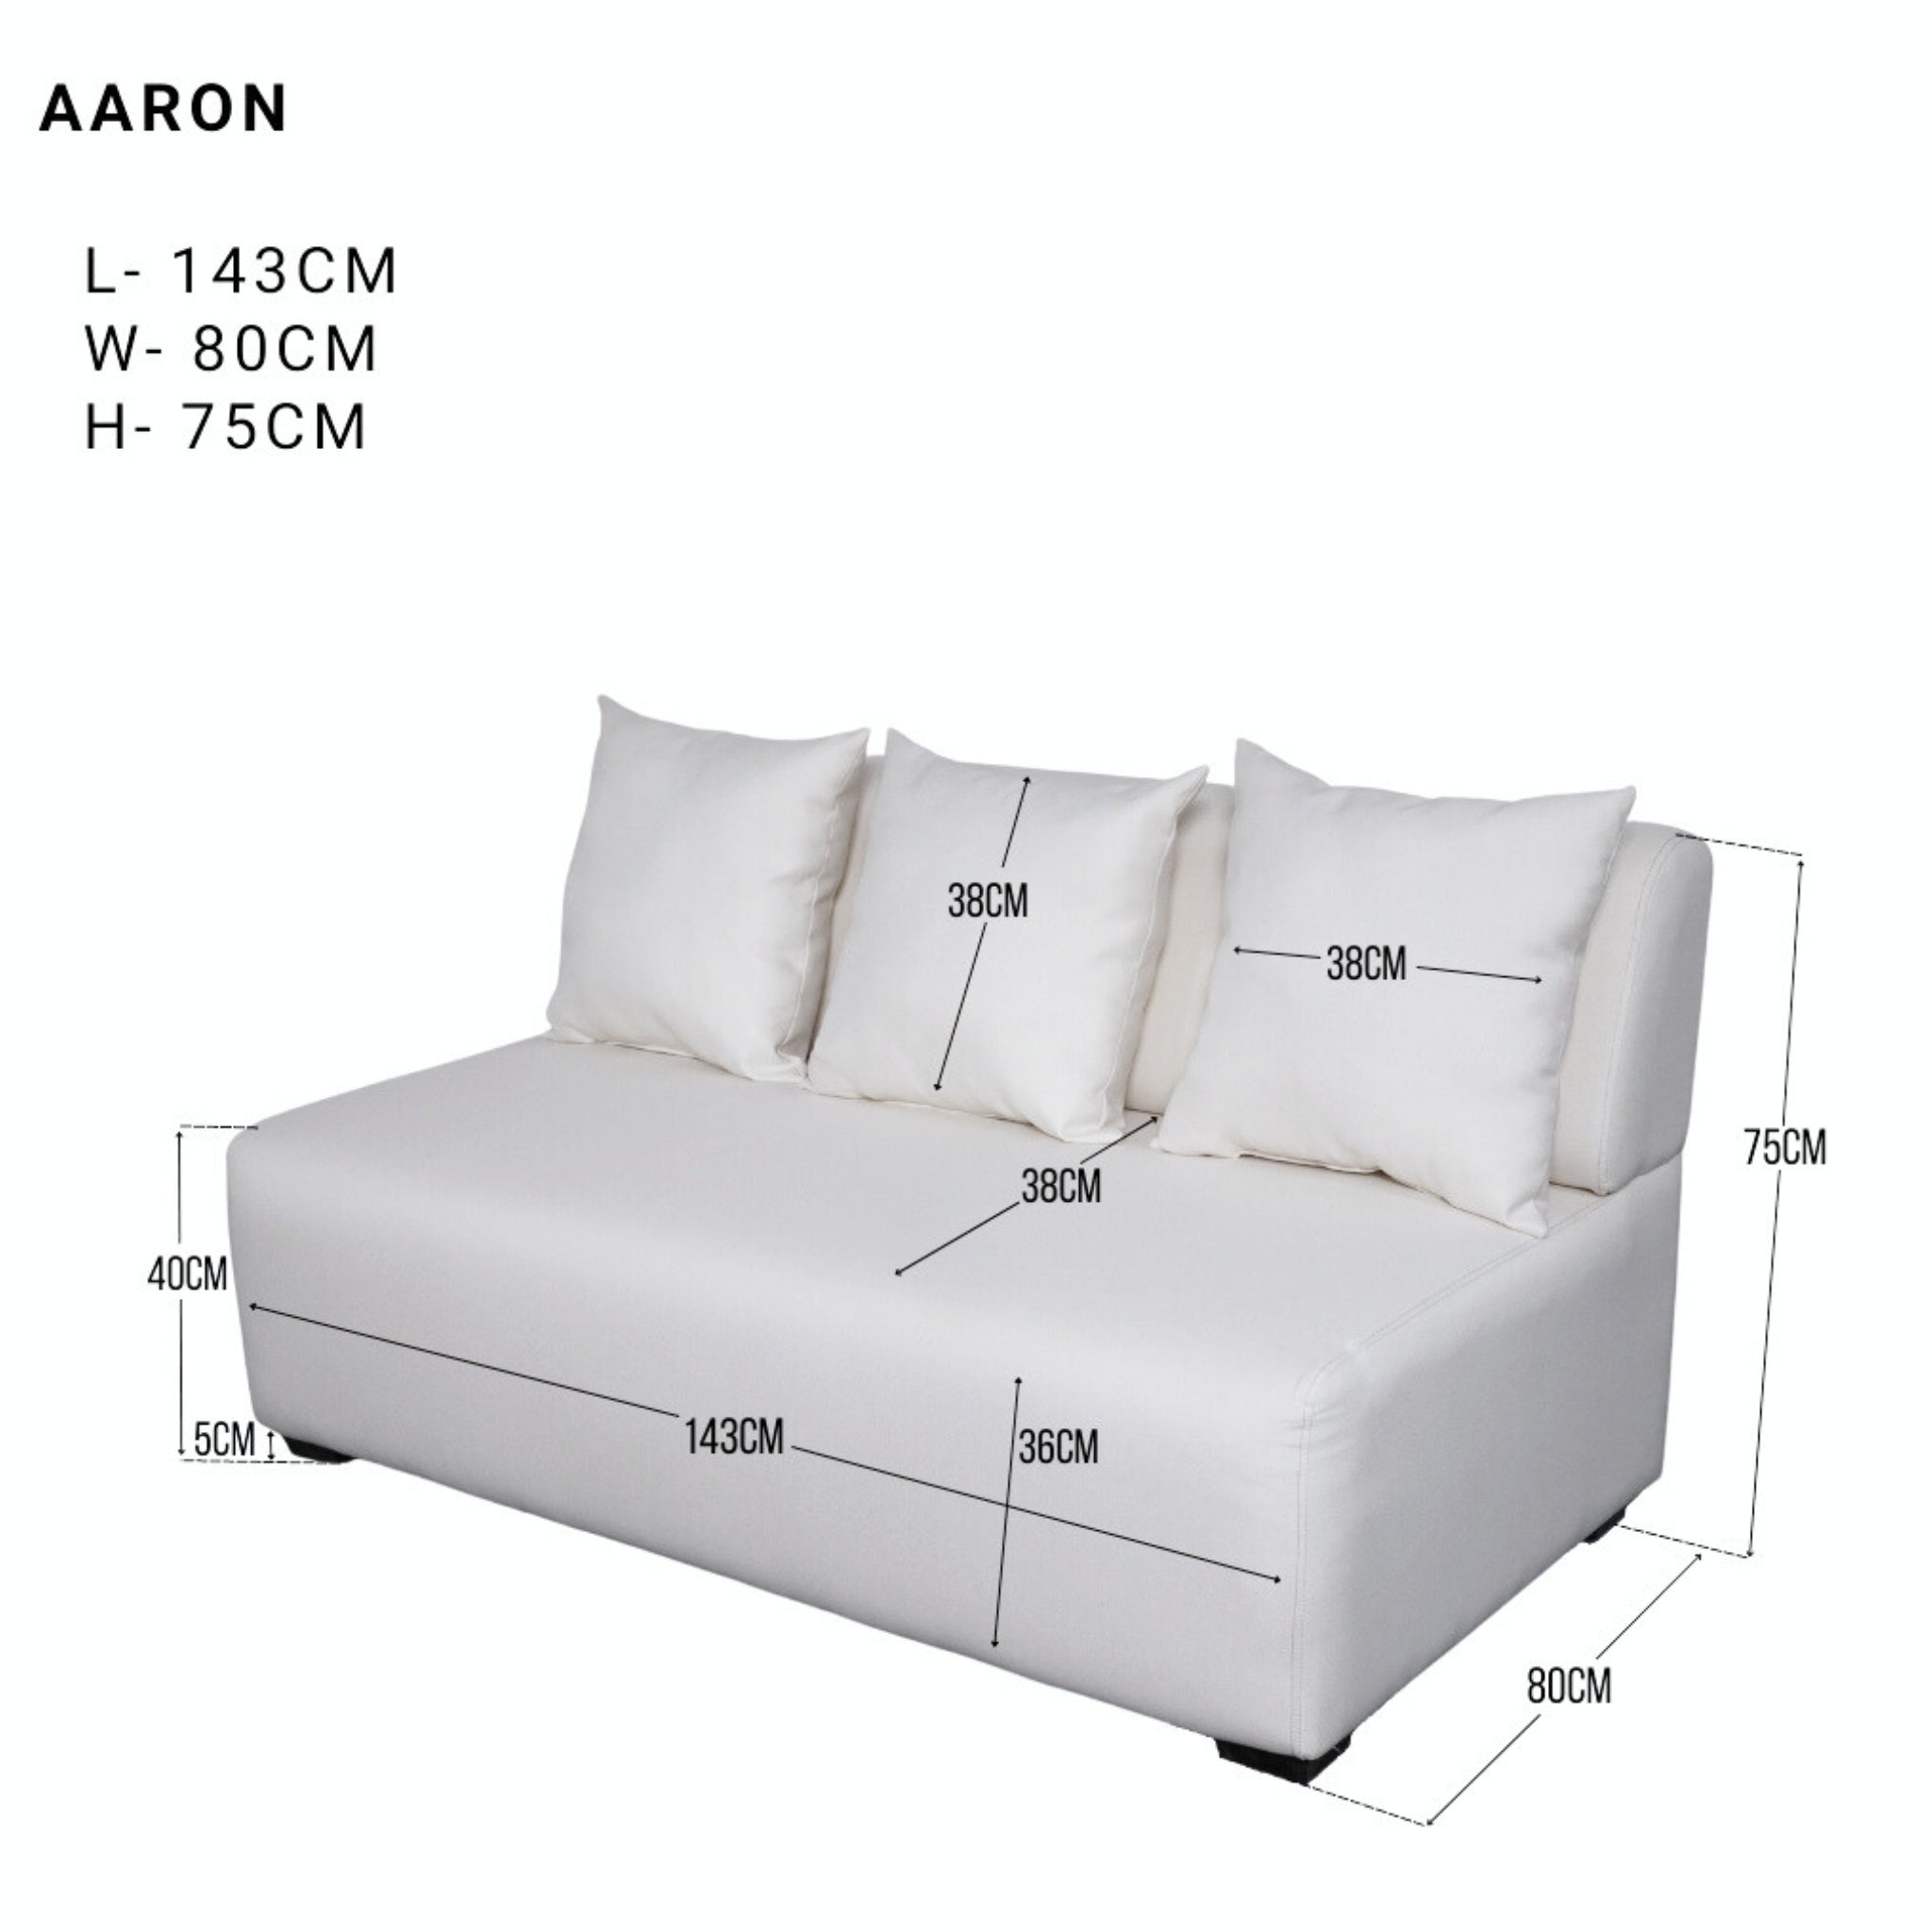 AARON 2-Seater Fabric Sofa AF Home